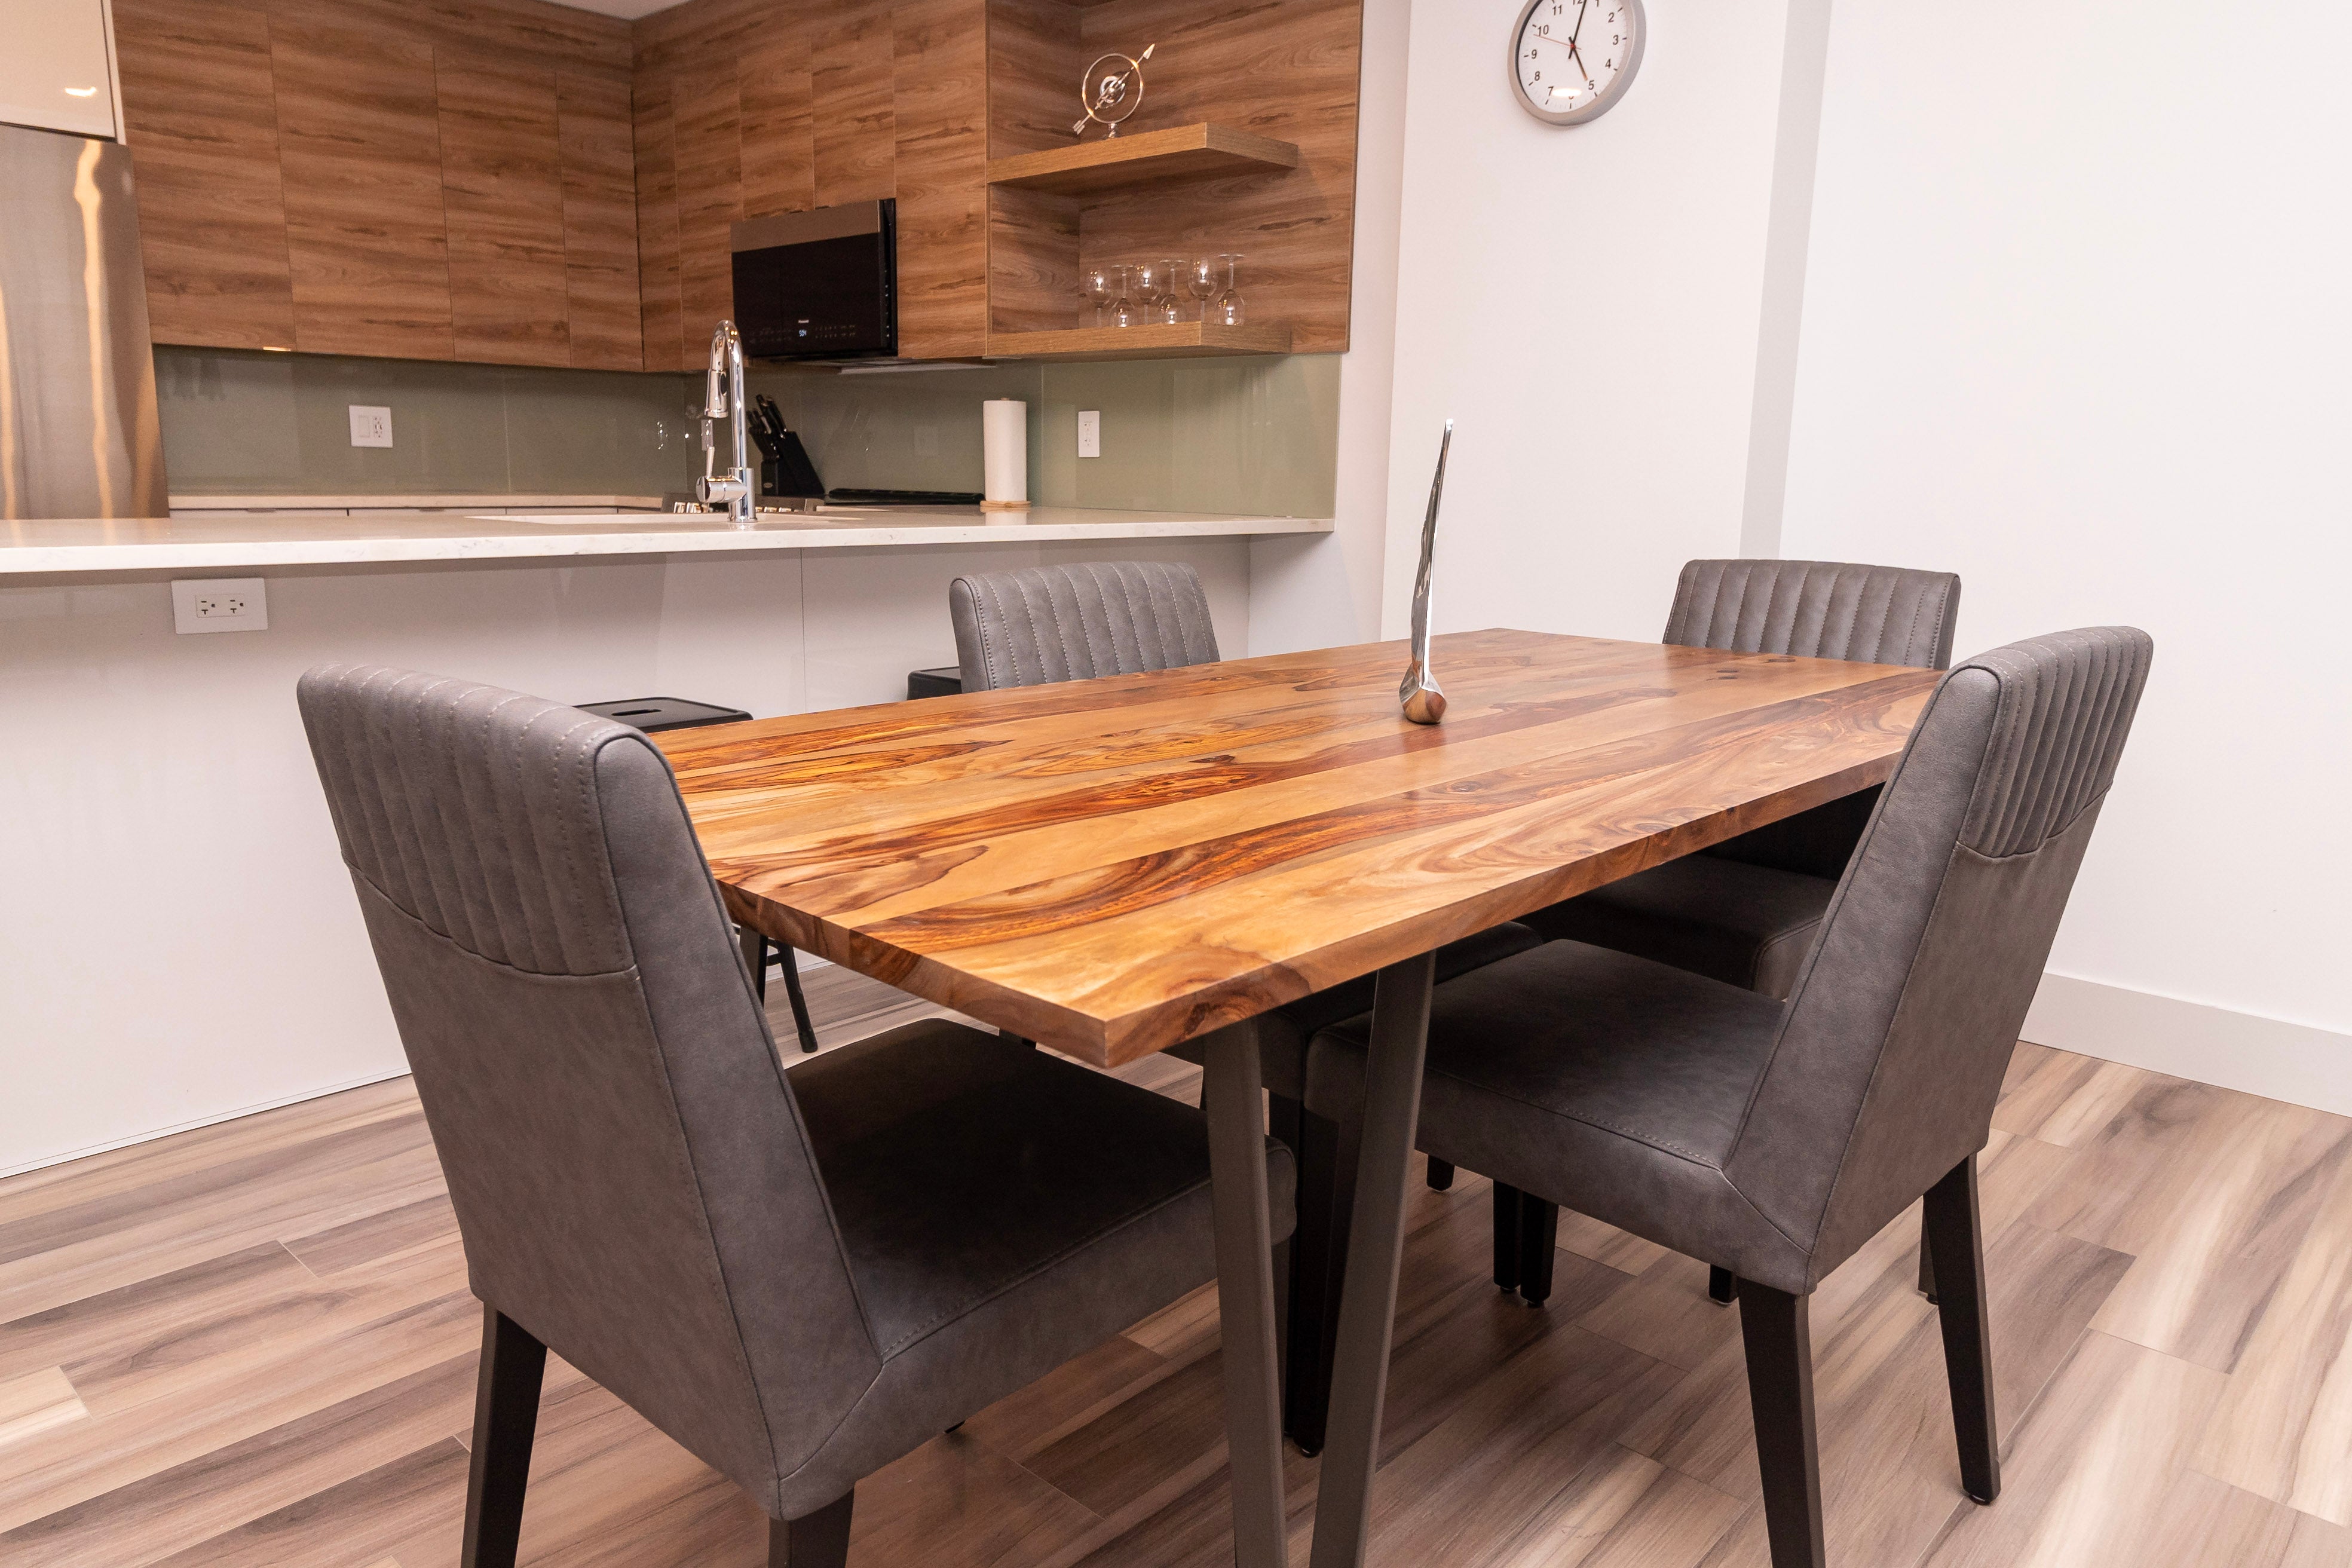 5 Reasons to Buy a Live Edge Table